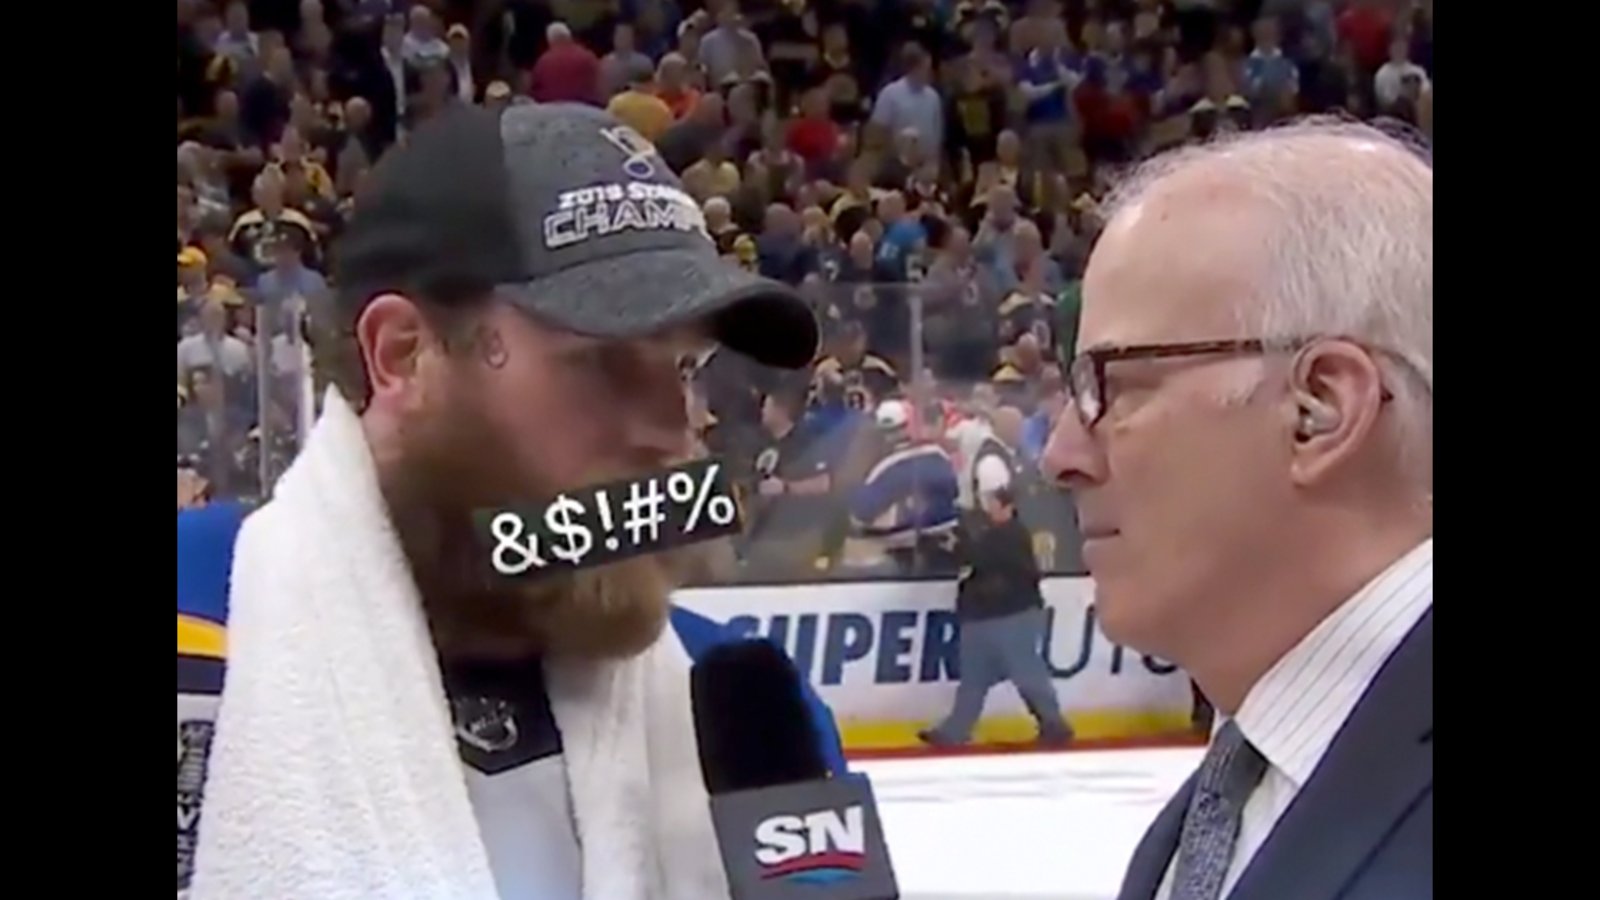 O’Reilly drops an F-bomb on live TV following Game 7 win